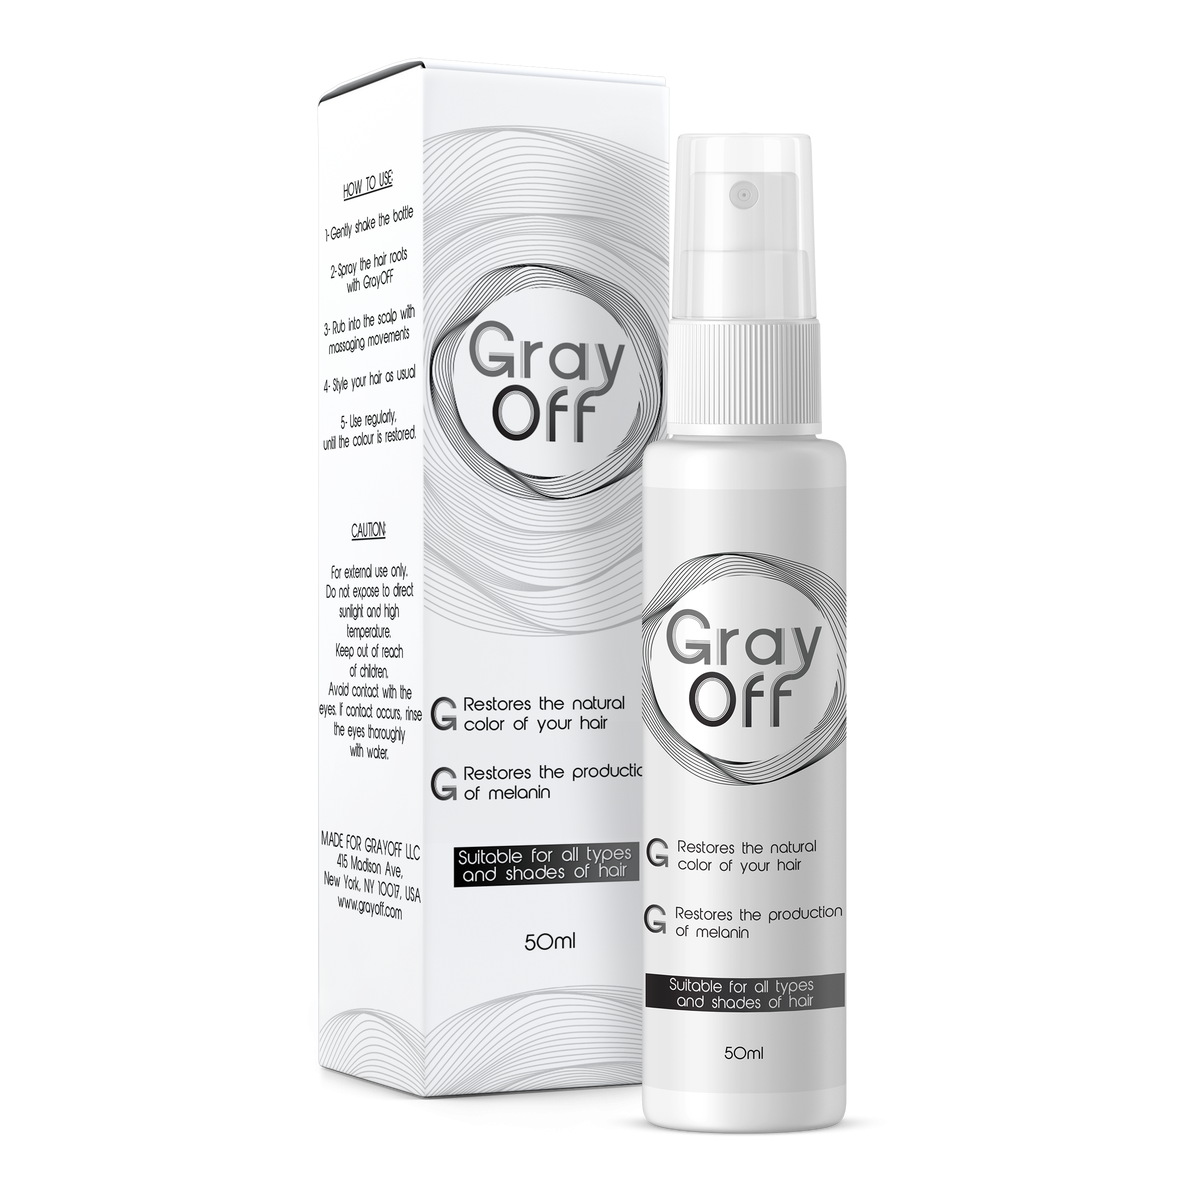 GrayOFF Updated guide 2019, price, reviews, effect - forum, hair spray,  ingredients - side effects? Taiwan - manufacturer - Carlysvoice